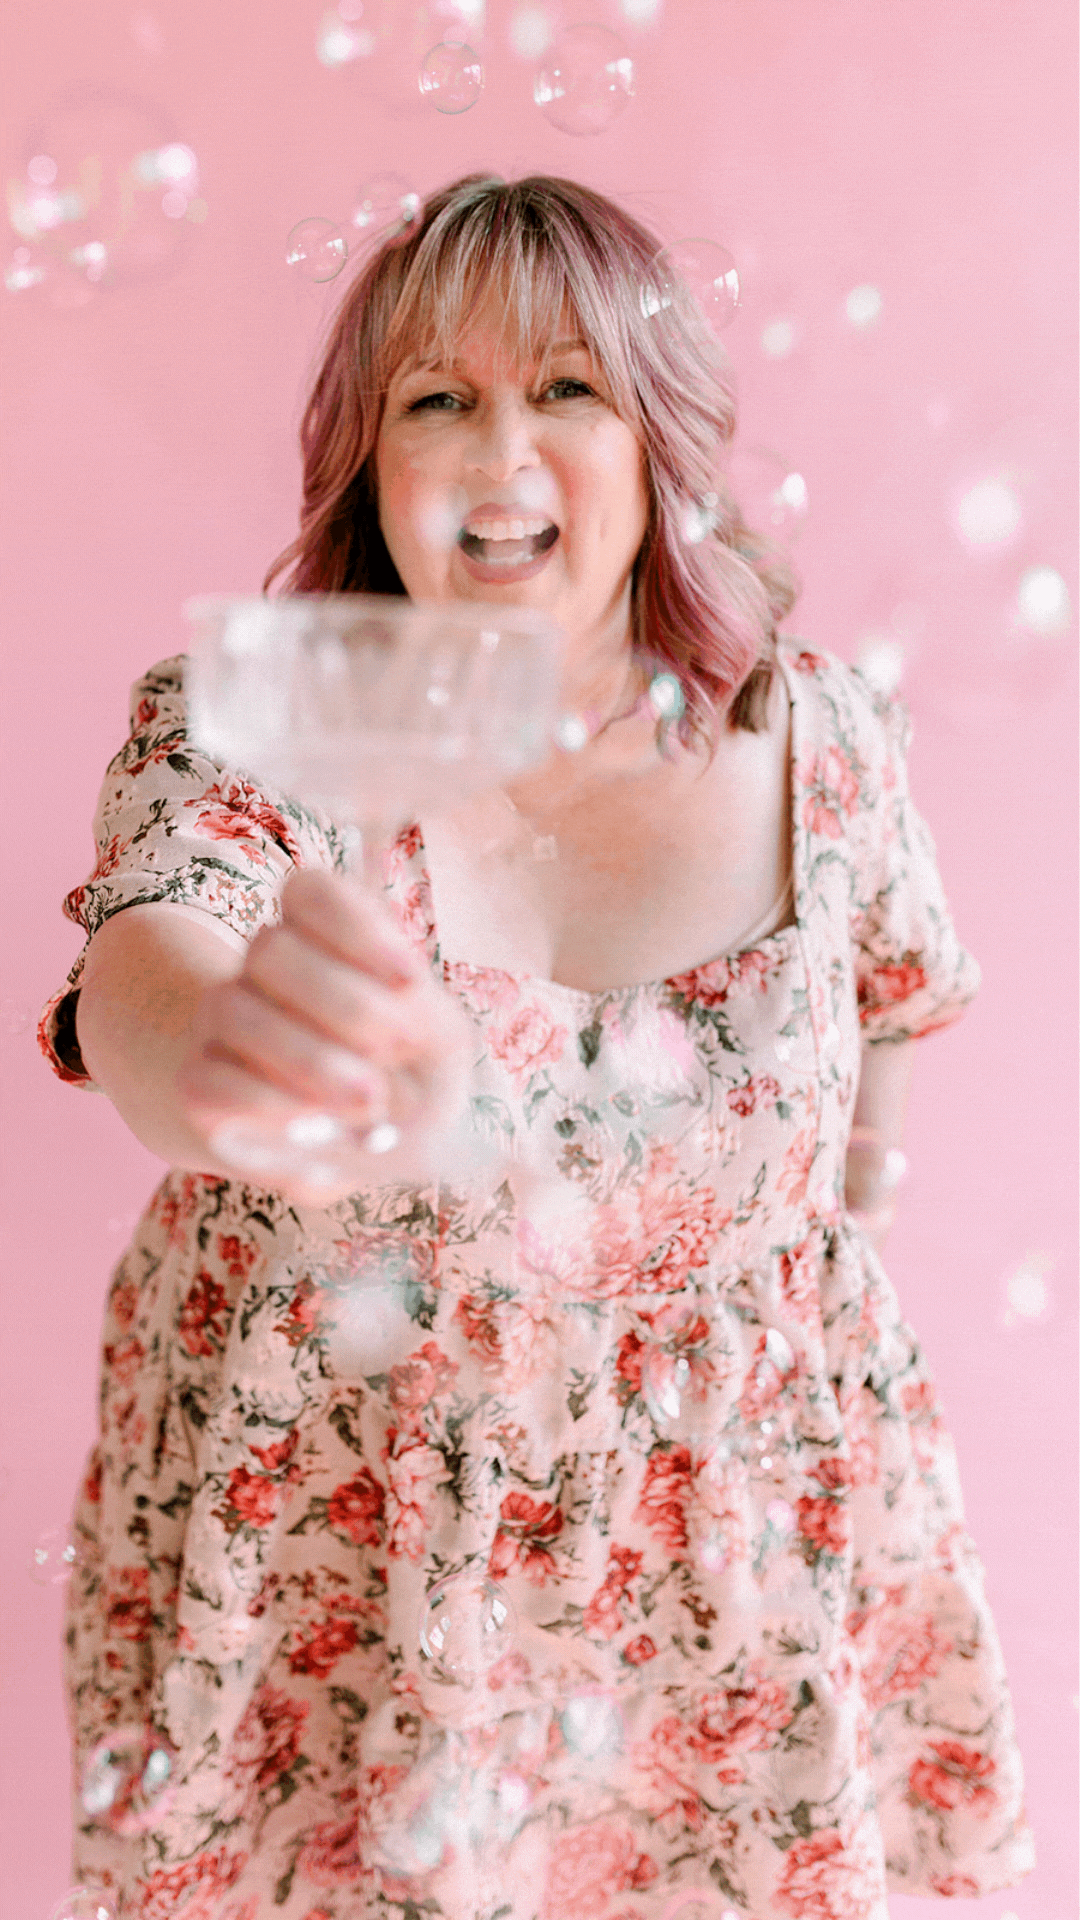 Woman with pink hair and white skin is sipping champagne and laughing in floral pink party dress, in front of a pink backdrop.